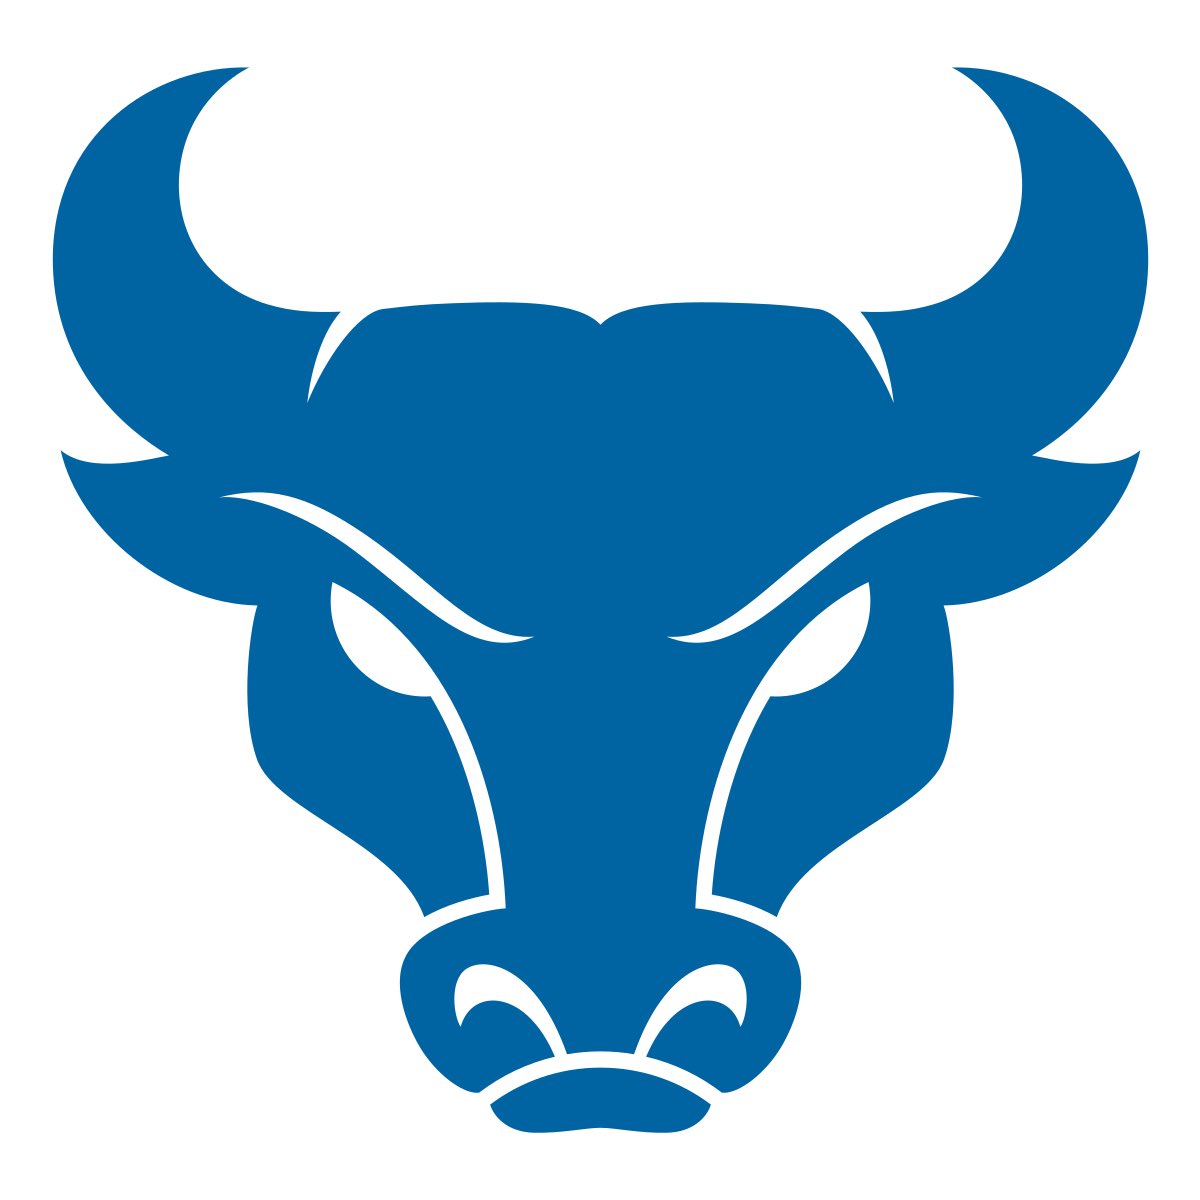 Extremely thankful to receive an offer from the University at Buffalo!!